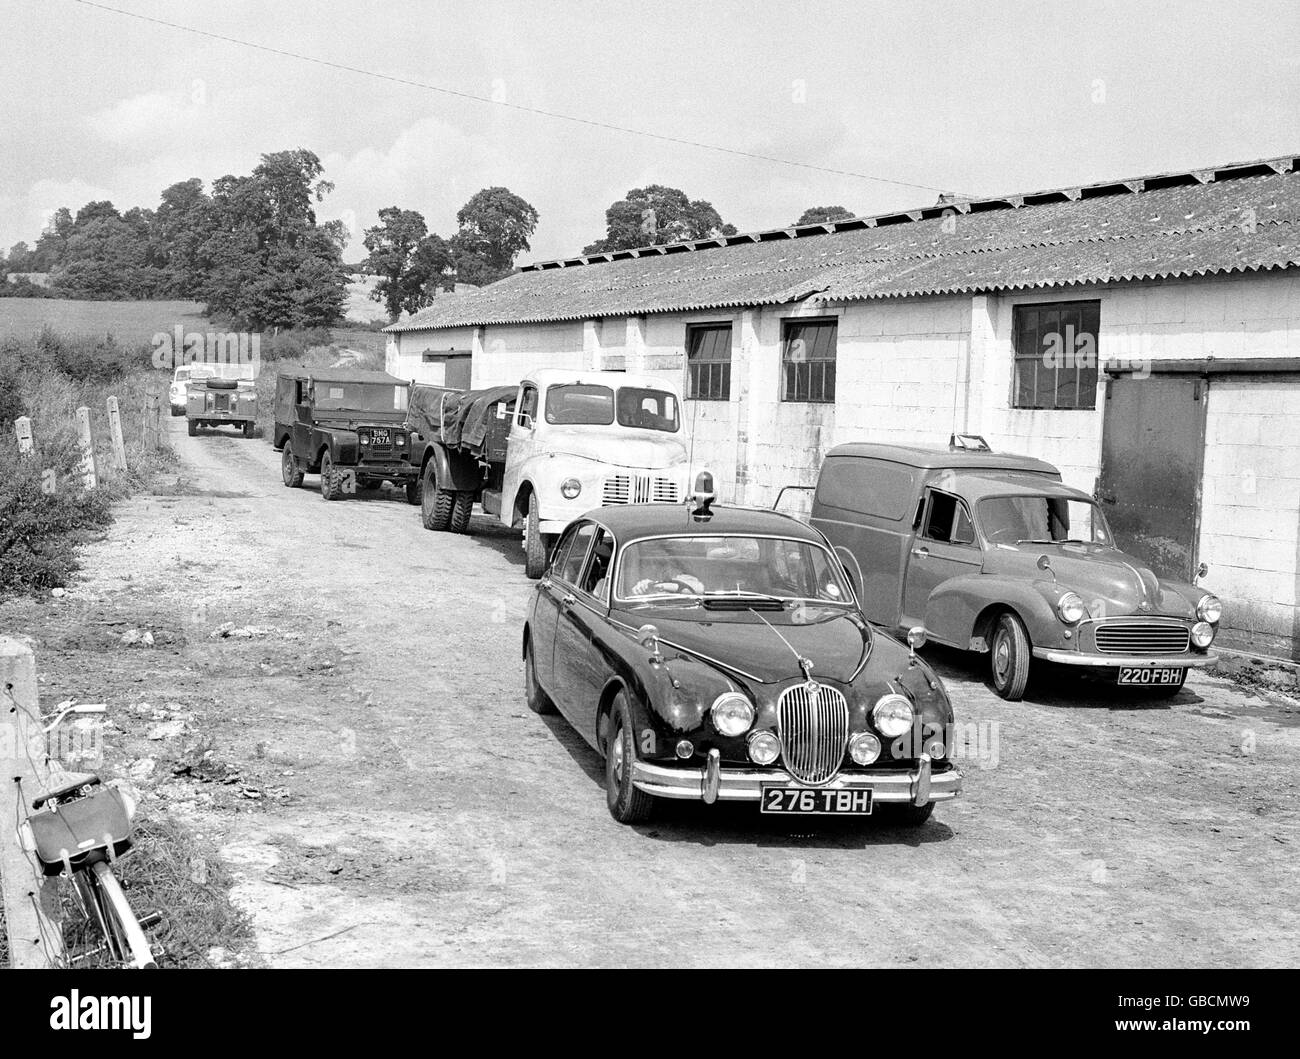 A police-car escorts the lorry and two Land Rovers, which police believe the bandits carried much or all of their haul after the 2.6 million pound mail train robbery, out of Leatherslade Farm, Oakley, Bukinghamshire, where the gang hid after the crime. Stock Photo